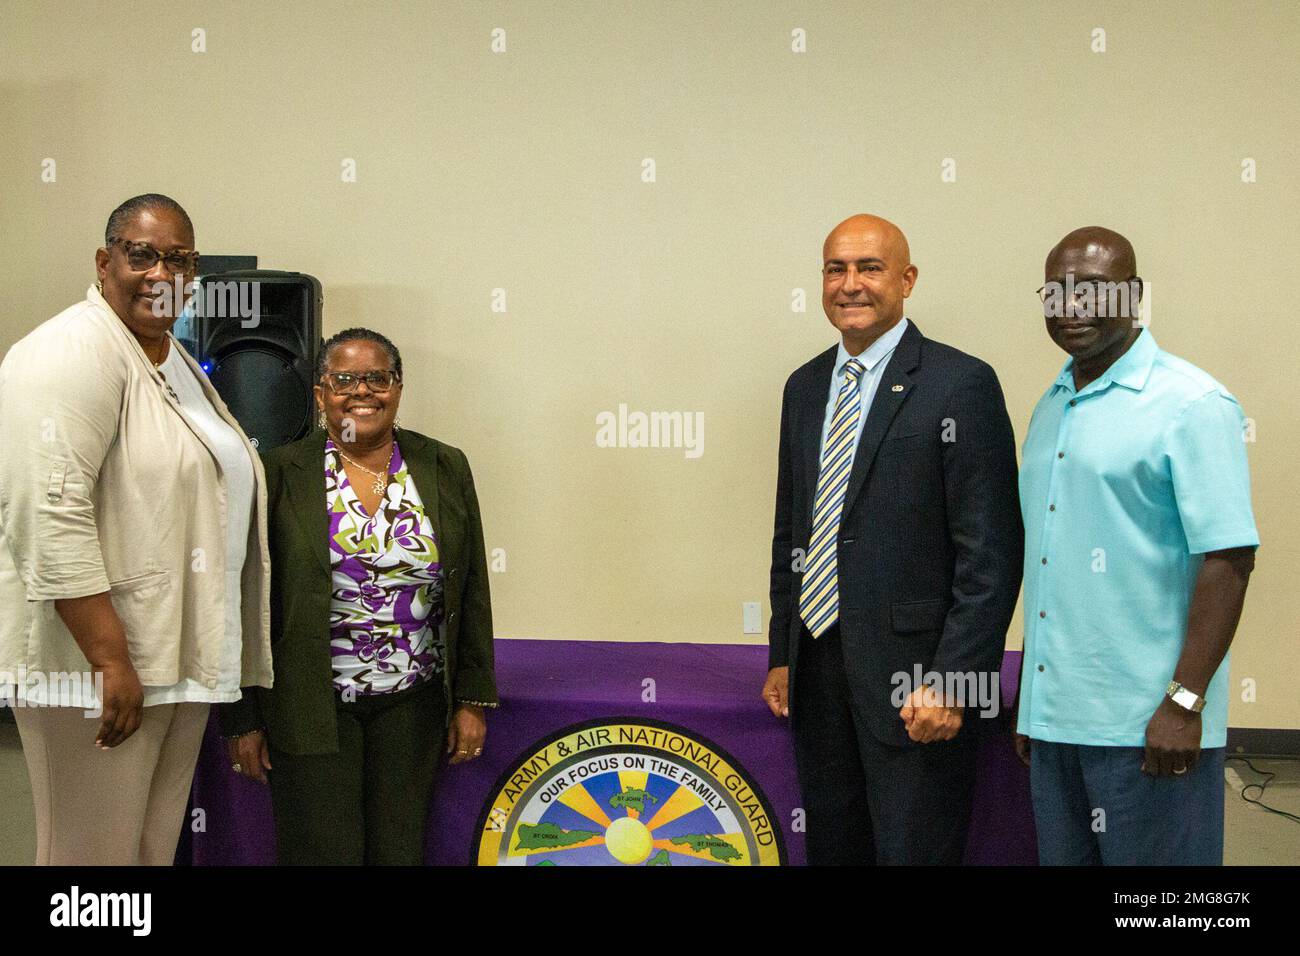 (l-r) Ms. Lorelle Clarke, Ms. Linda Todman, Mr. Angel Diaz, and Mr. Beresford Edwards pose for a photo during the V.I. National Guard State Family Program Office presentation of the 2021 National Guard Family Program Community Purple Award, Monday, August 22, 2022.     In a small ceremony held at the Joint Force Headquarters facility, Mr. Angel E. Diaz Jr., veteran, and co-owner of the La Reine Chicken Shack, was awarded the Family Program Community Purple Award, which is awarded to organizations or businesses that exemplifies the true meaning of the purple concept within the National Family P Stock Photo